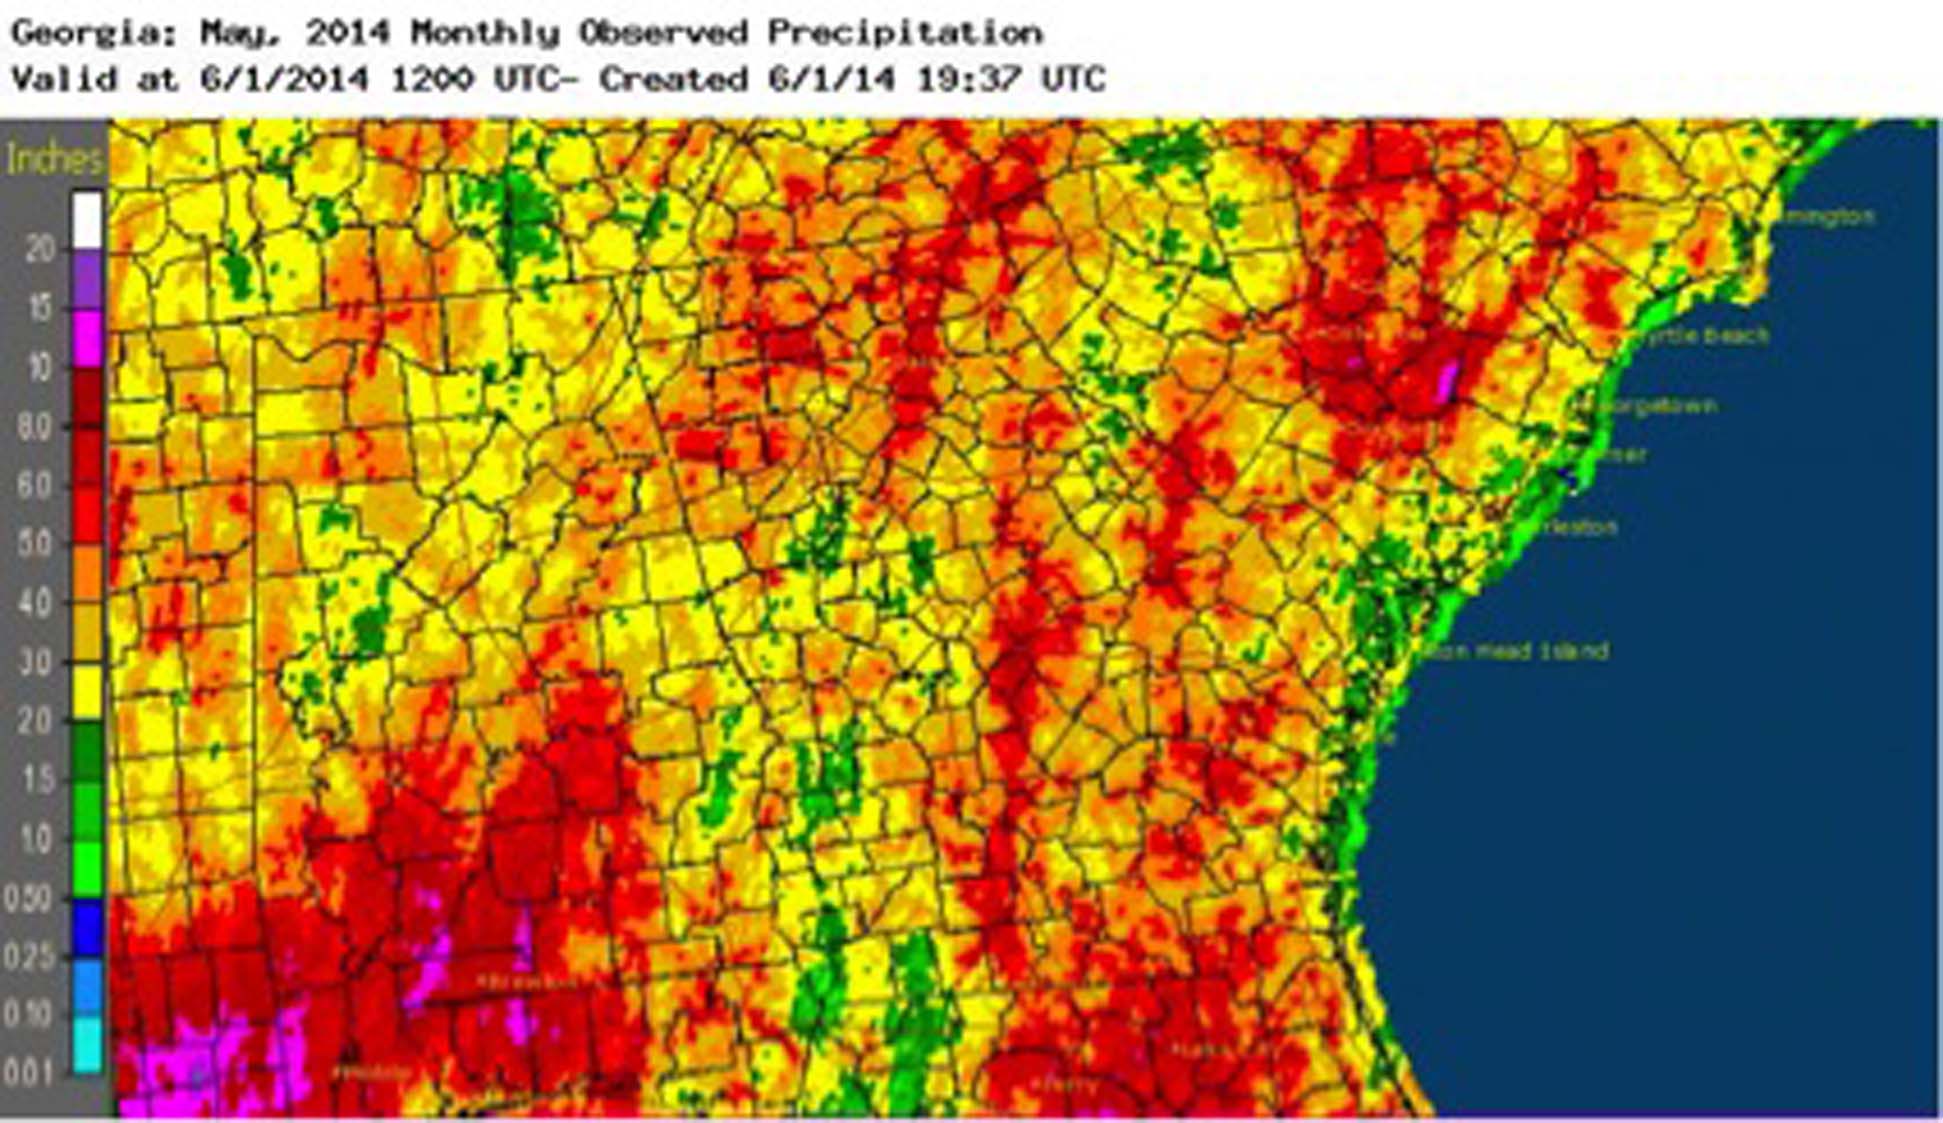 While parts of Georgia received periodic downpours connected to spring thunder showers, most of Georgia received normal amounts of rainfall during May.